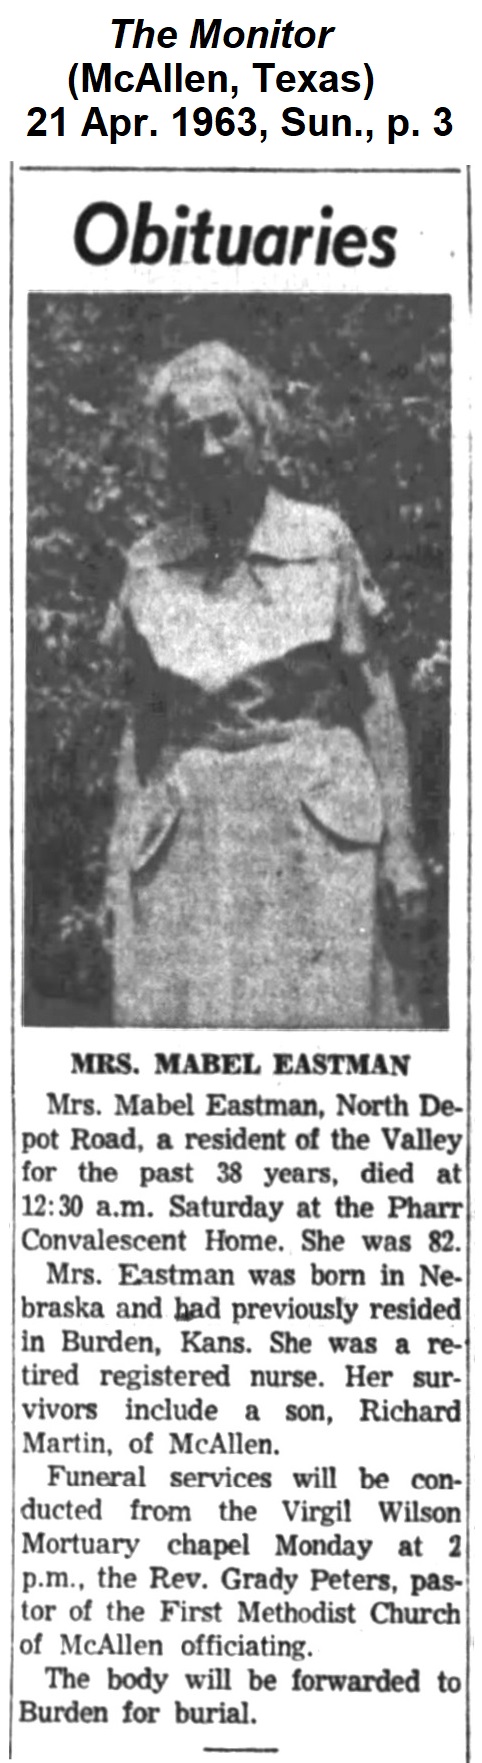 Obituary of Mabel Rhine Eastman
                from The Monitor of McAllen, Texas, of 21 April 1963.